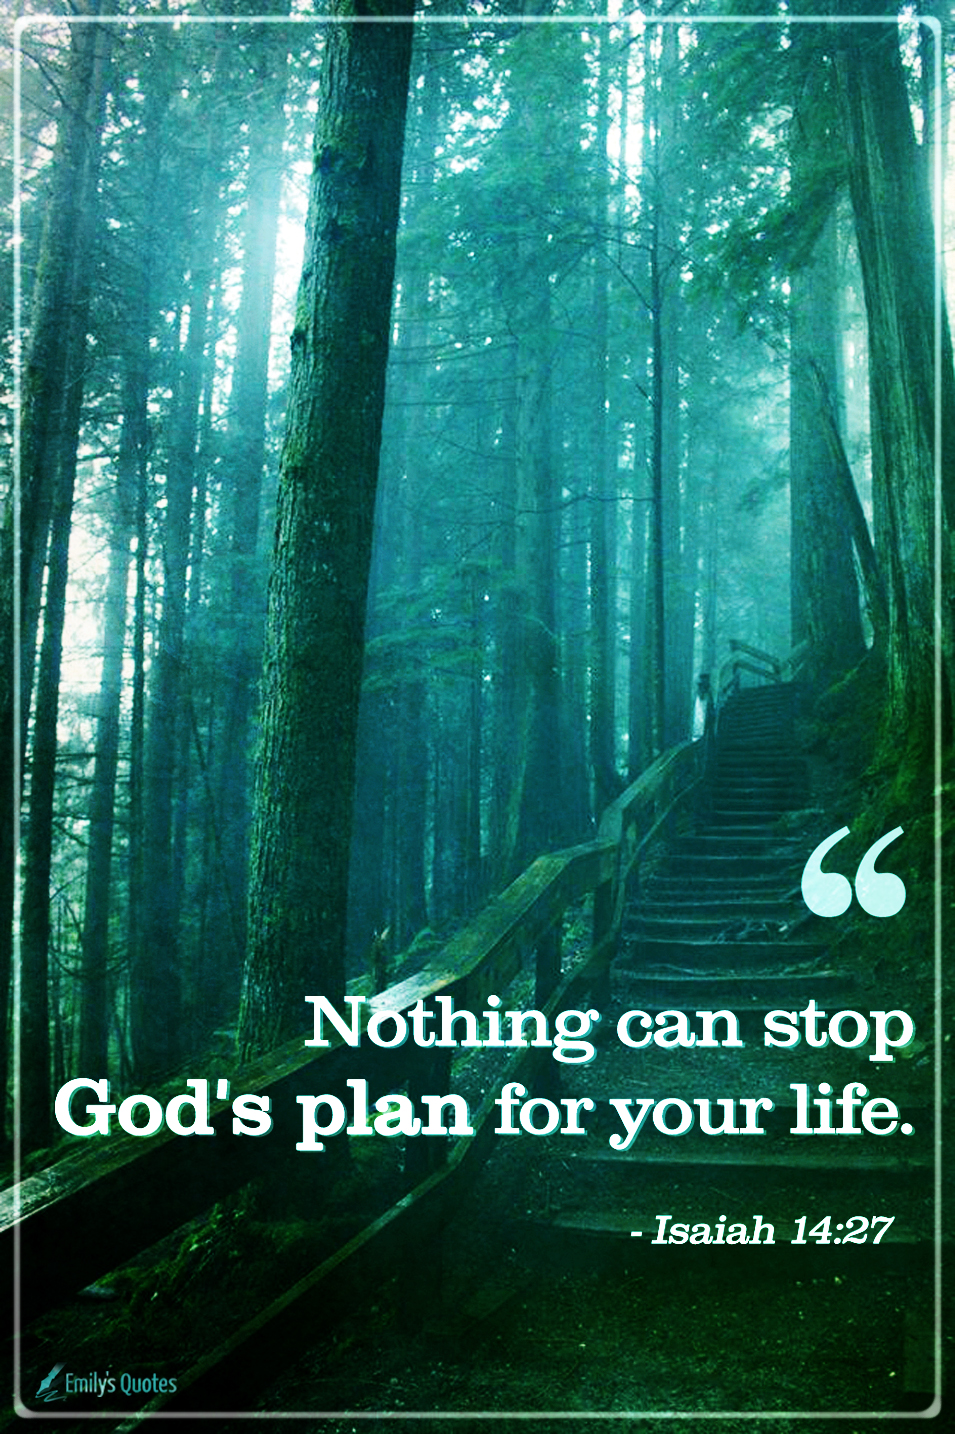 Nothing can stop God’s plan for your life